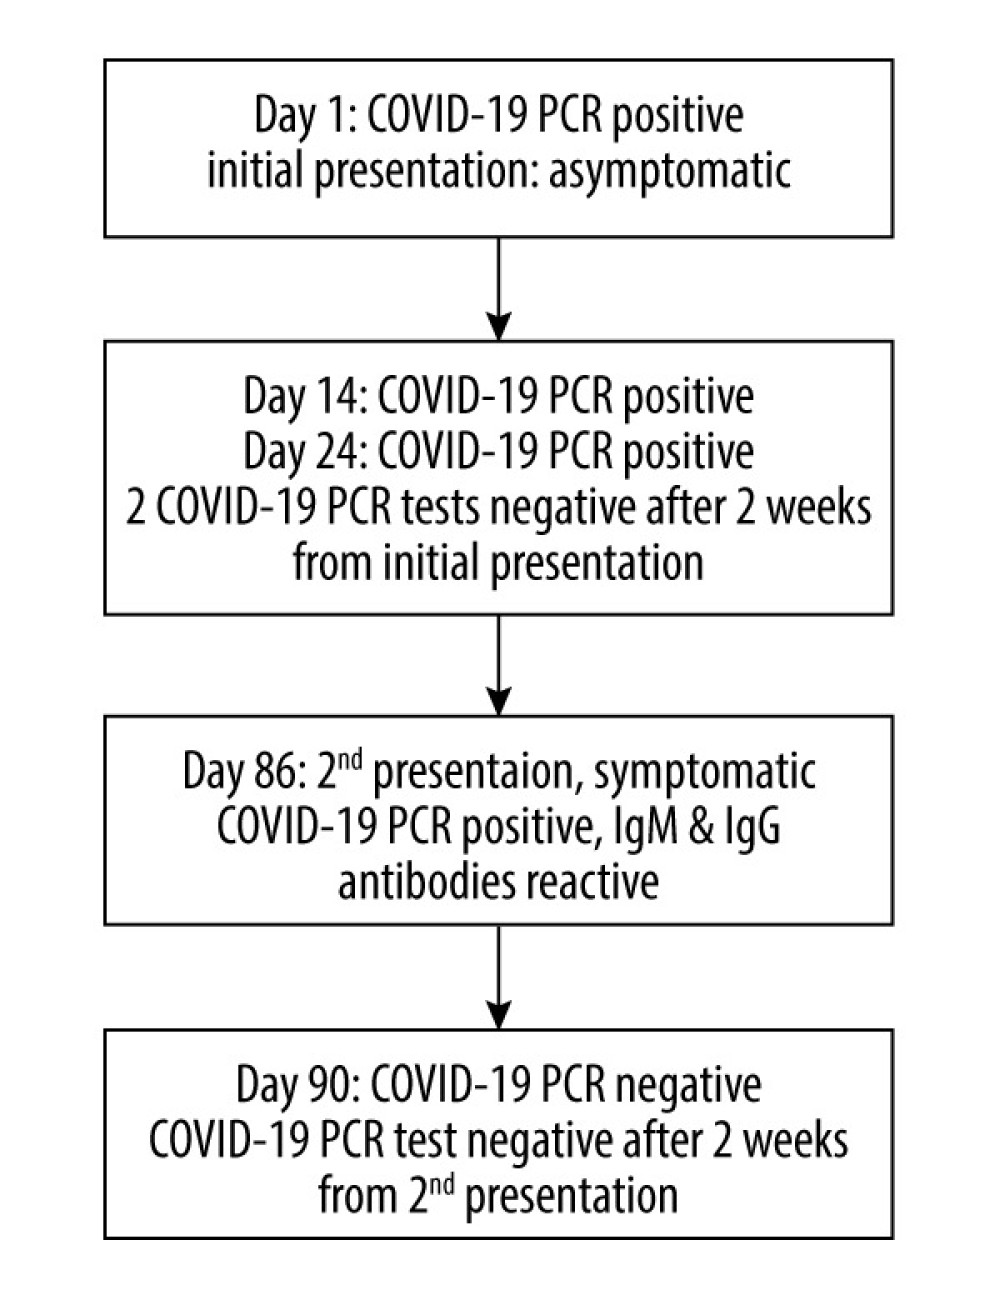 Timeline of severe acute respiratory syndrome coronavirus 2 reinfection over a period of 3 months. On day 1, the patient was found to have asymptomatic coronavirus disease 2019 (COVID-19). COVID-19 PCR samples were negative on days 14 and 24. On day 86, the patient developed symptomatic COVID-19 with reactive IgG and IgM antibodies.